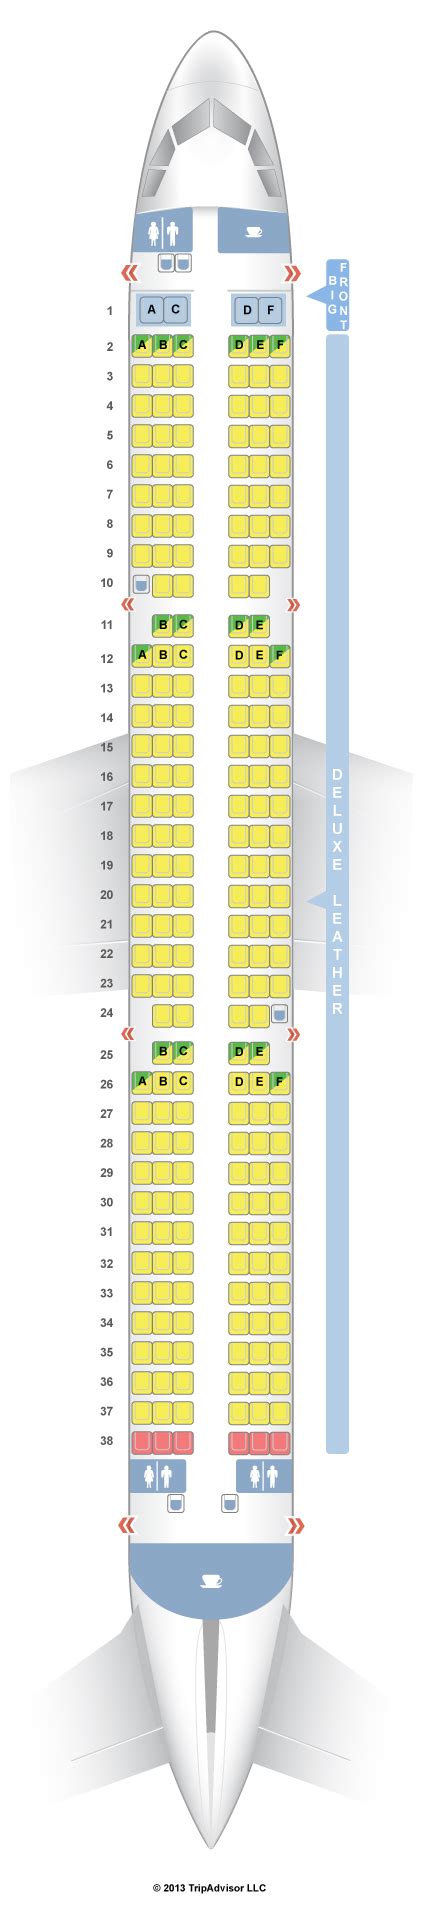 Loong Air Airbus A321 planes seat map. Loong Air's Airbus A321, outfitted in a two-class configuration, offers a blend of luxury and comfort across its Business and Economy sections. With 8 to 16 seats in Business Class, passengers can enjoy an exclusive and intimate experience, featuring enhanced personal space, premium seating, and dedicated ...